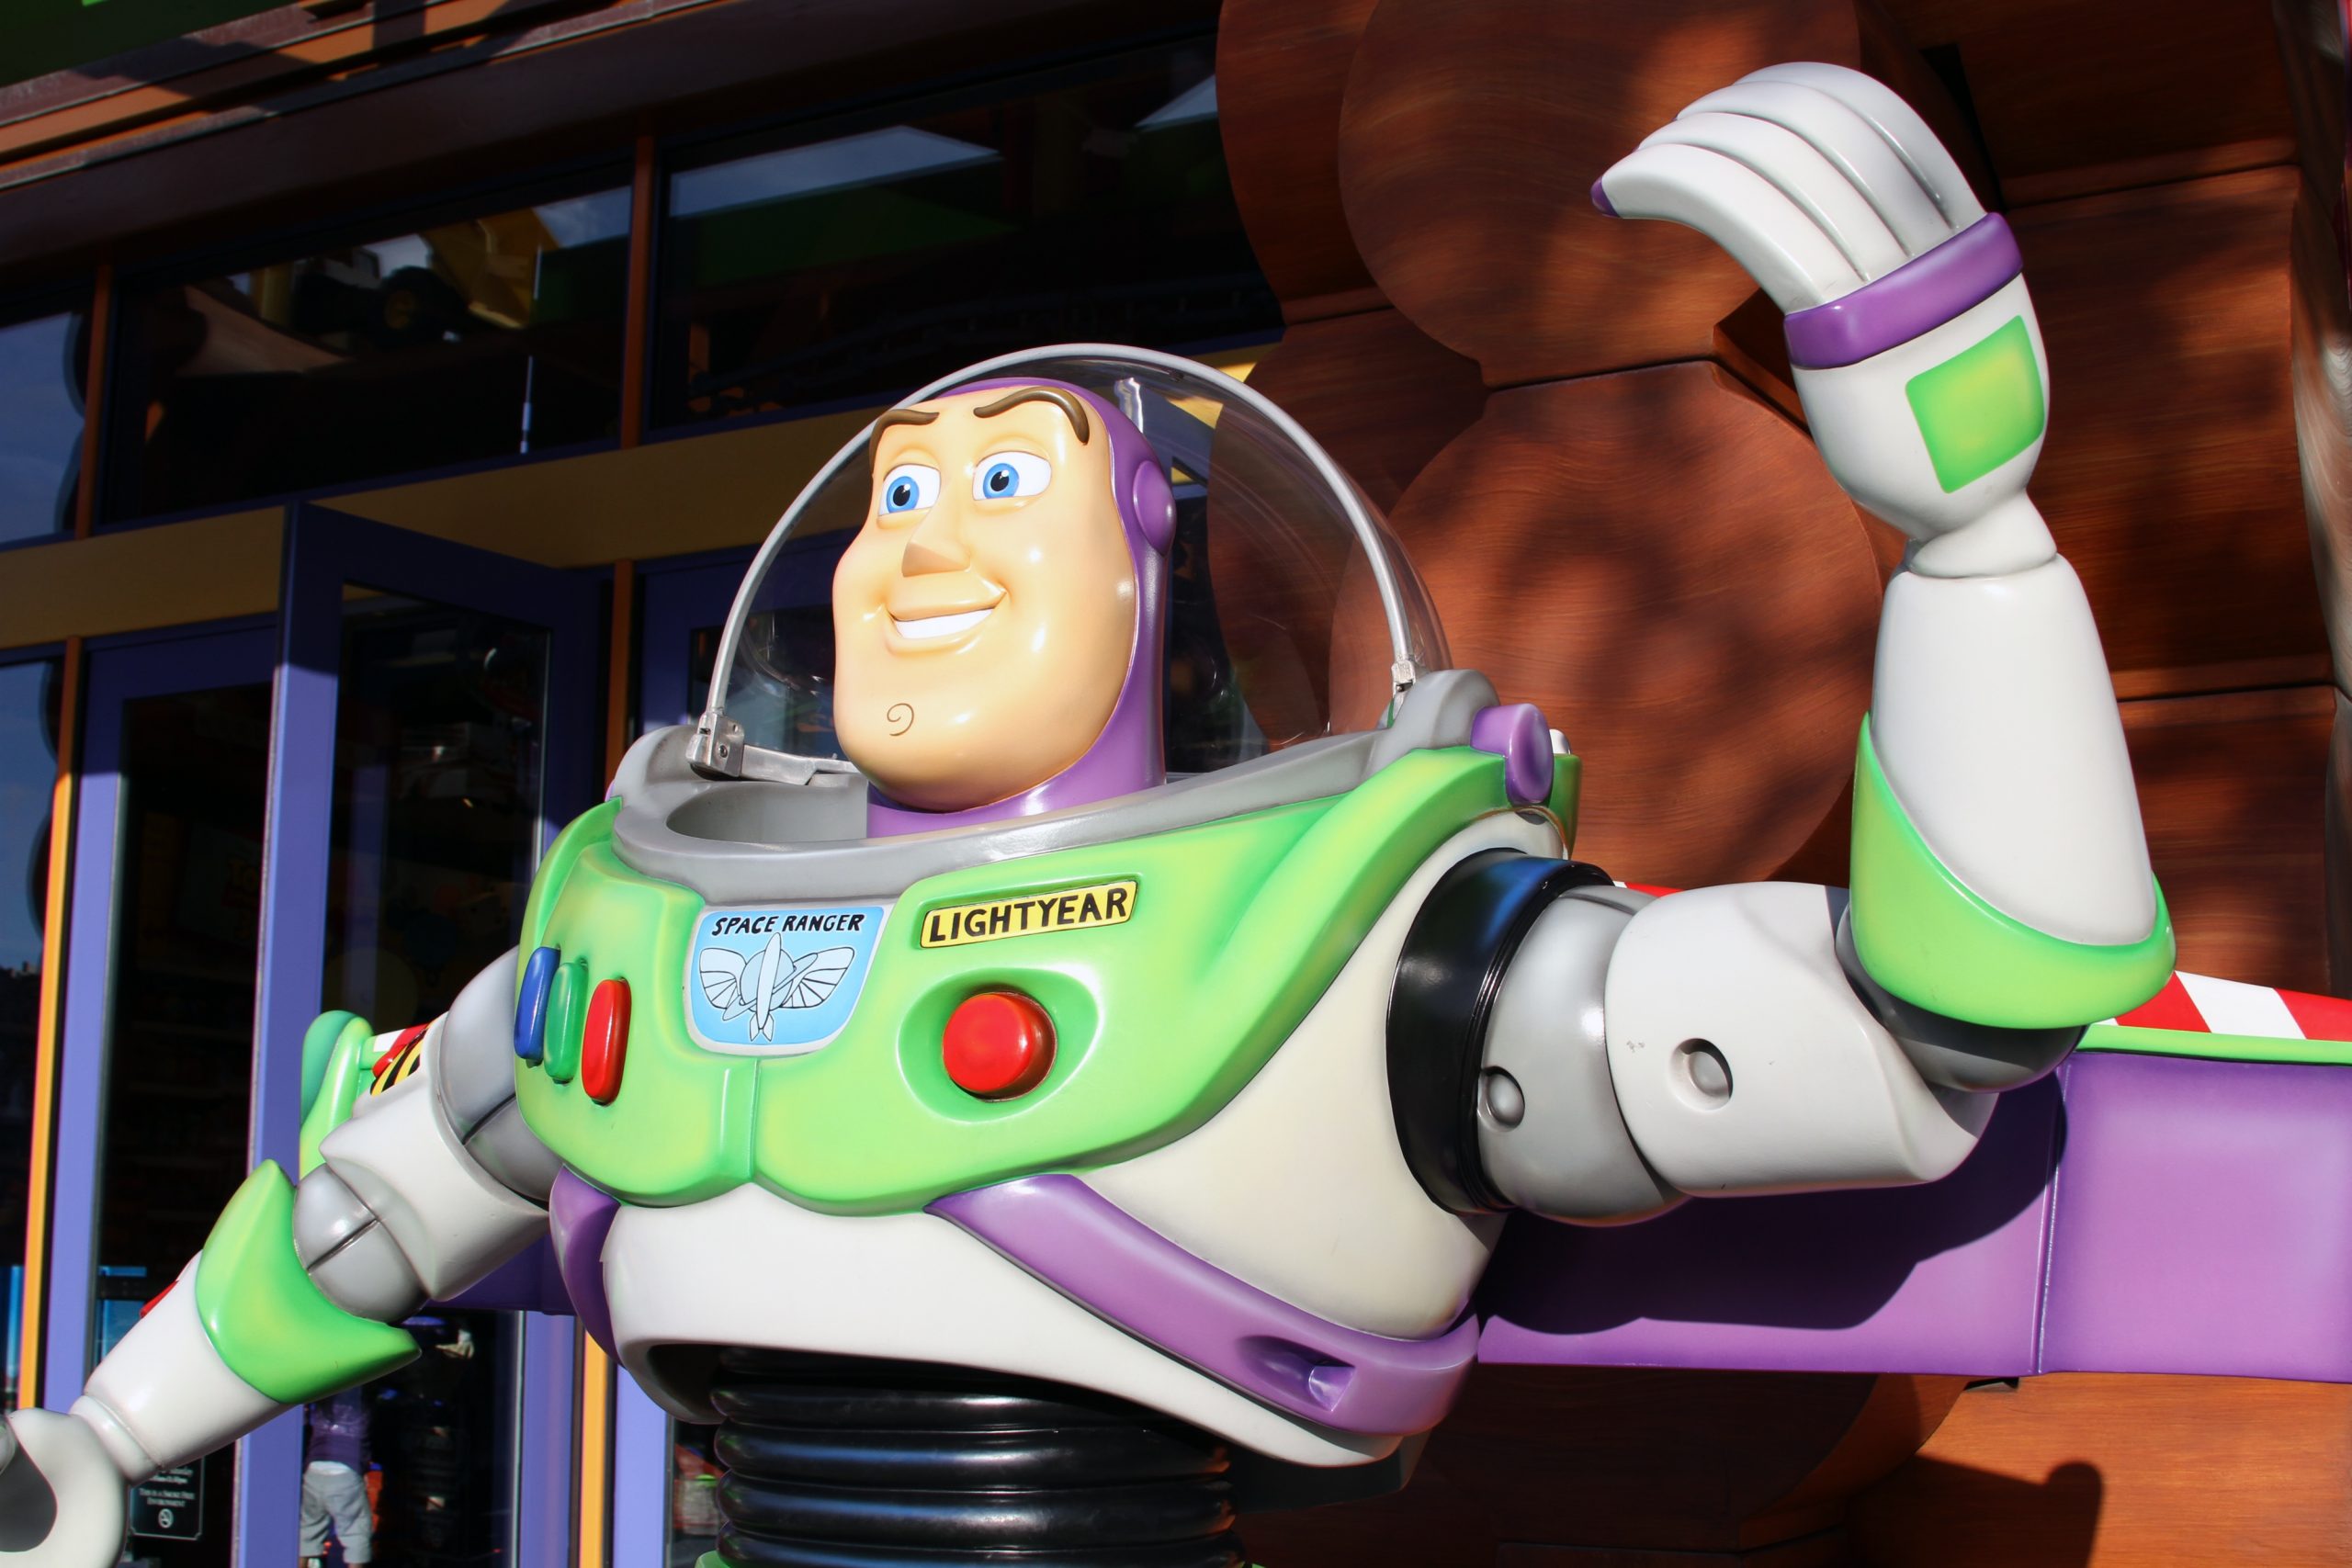 A close up picture of Buzz Lightyear